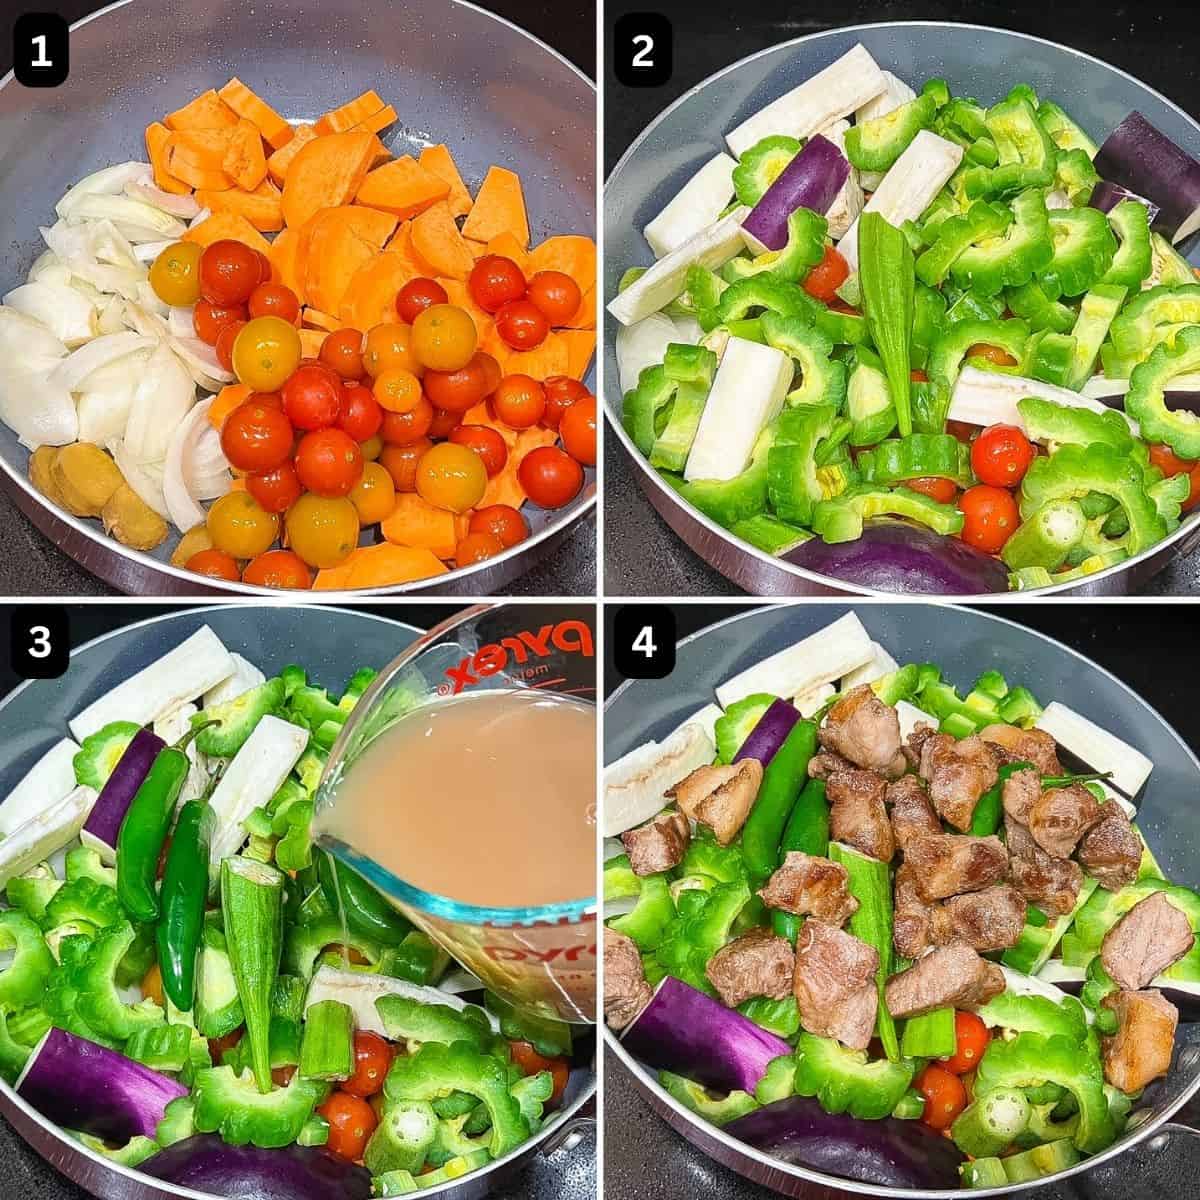 Step by step instructions on how to cook pakbet.